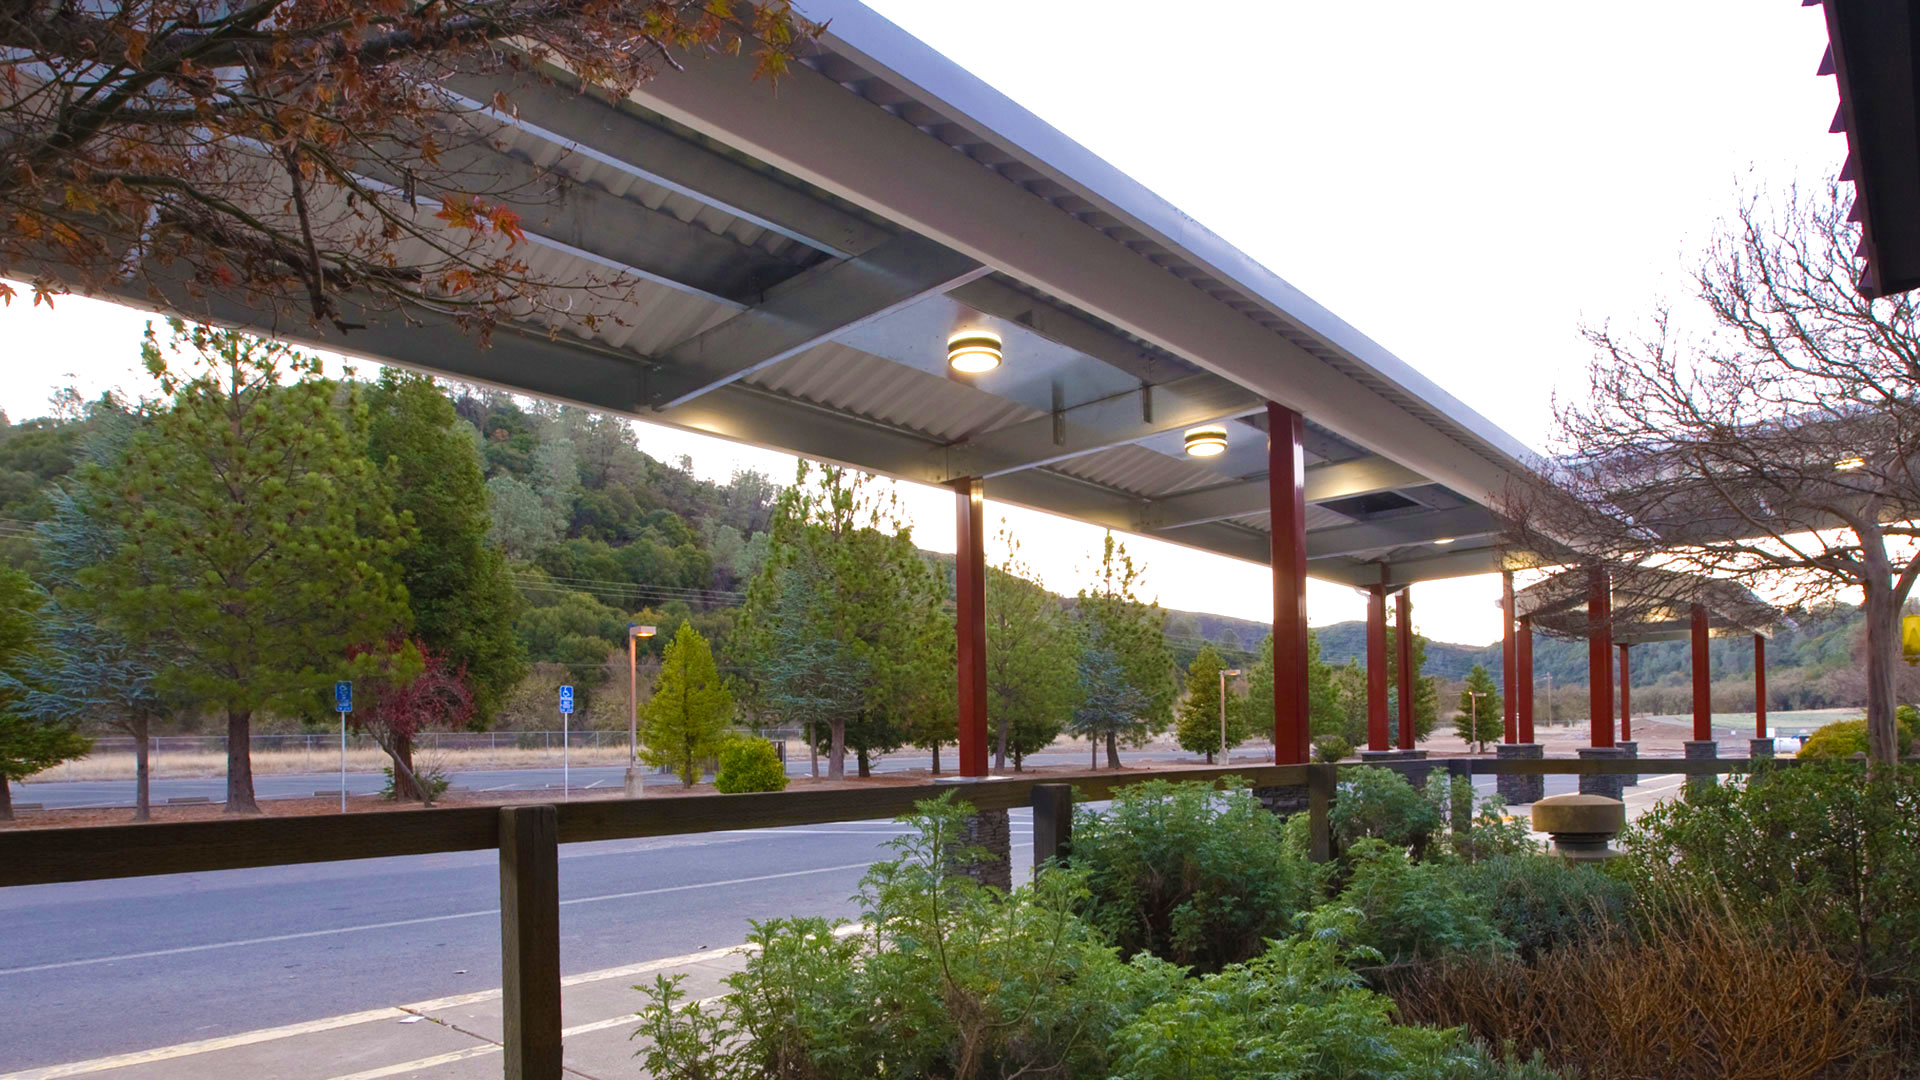 Canopies extending the walkway, with bushes in foreground and parking lot behind canopy.